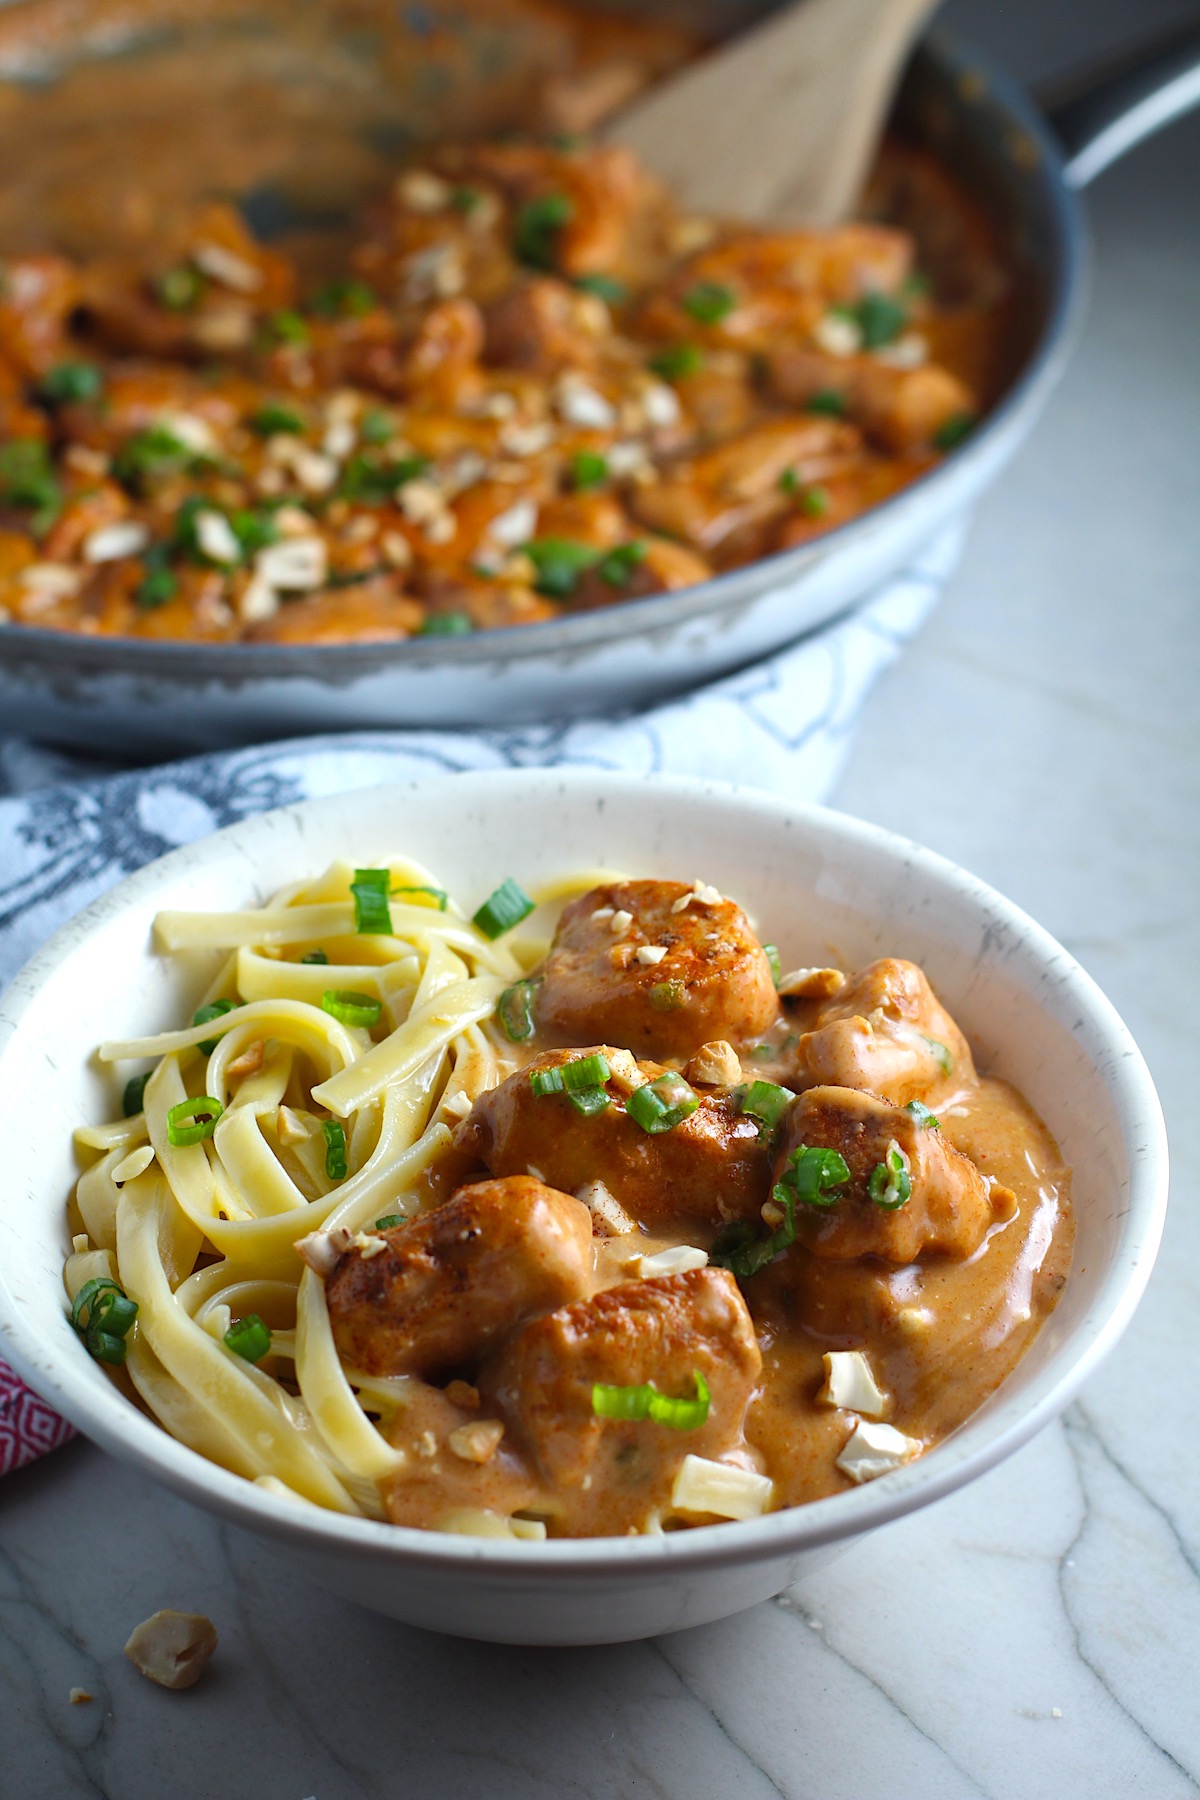 Quick Cooking Creamy Chicken Paprika in a bowl with pasta and pan in background. It's creamy, smokey, rich, and hearty. This is an easy weeknight family dinner!